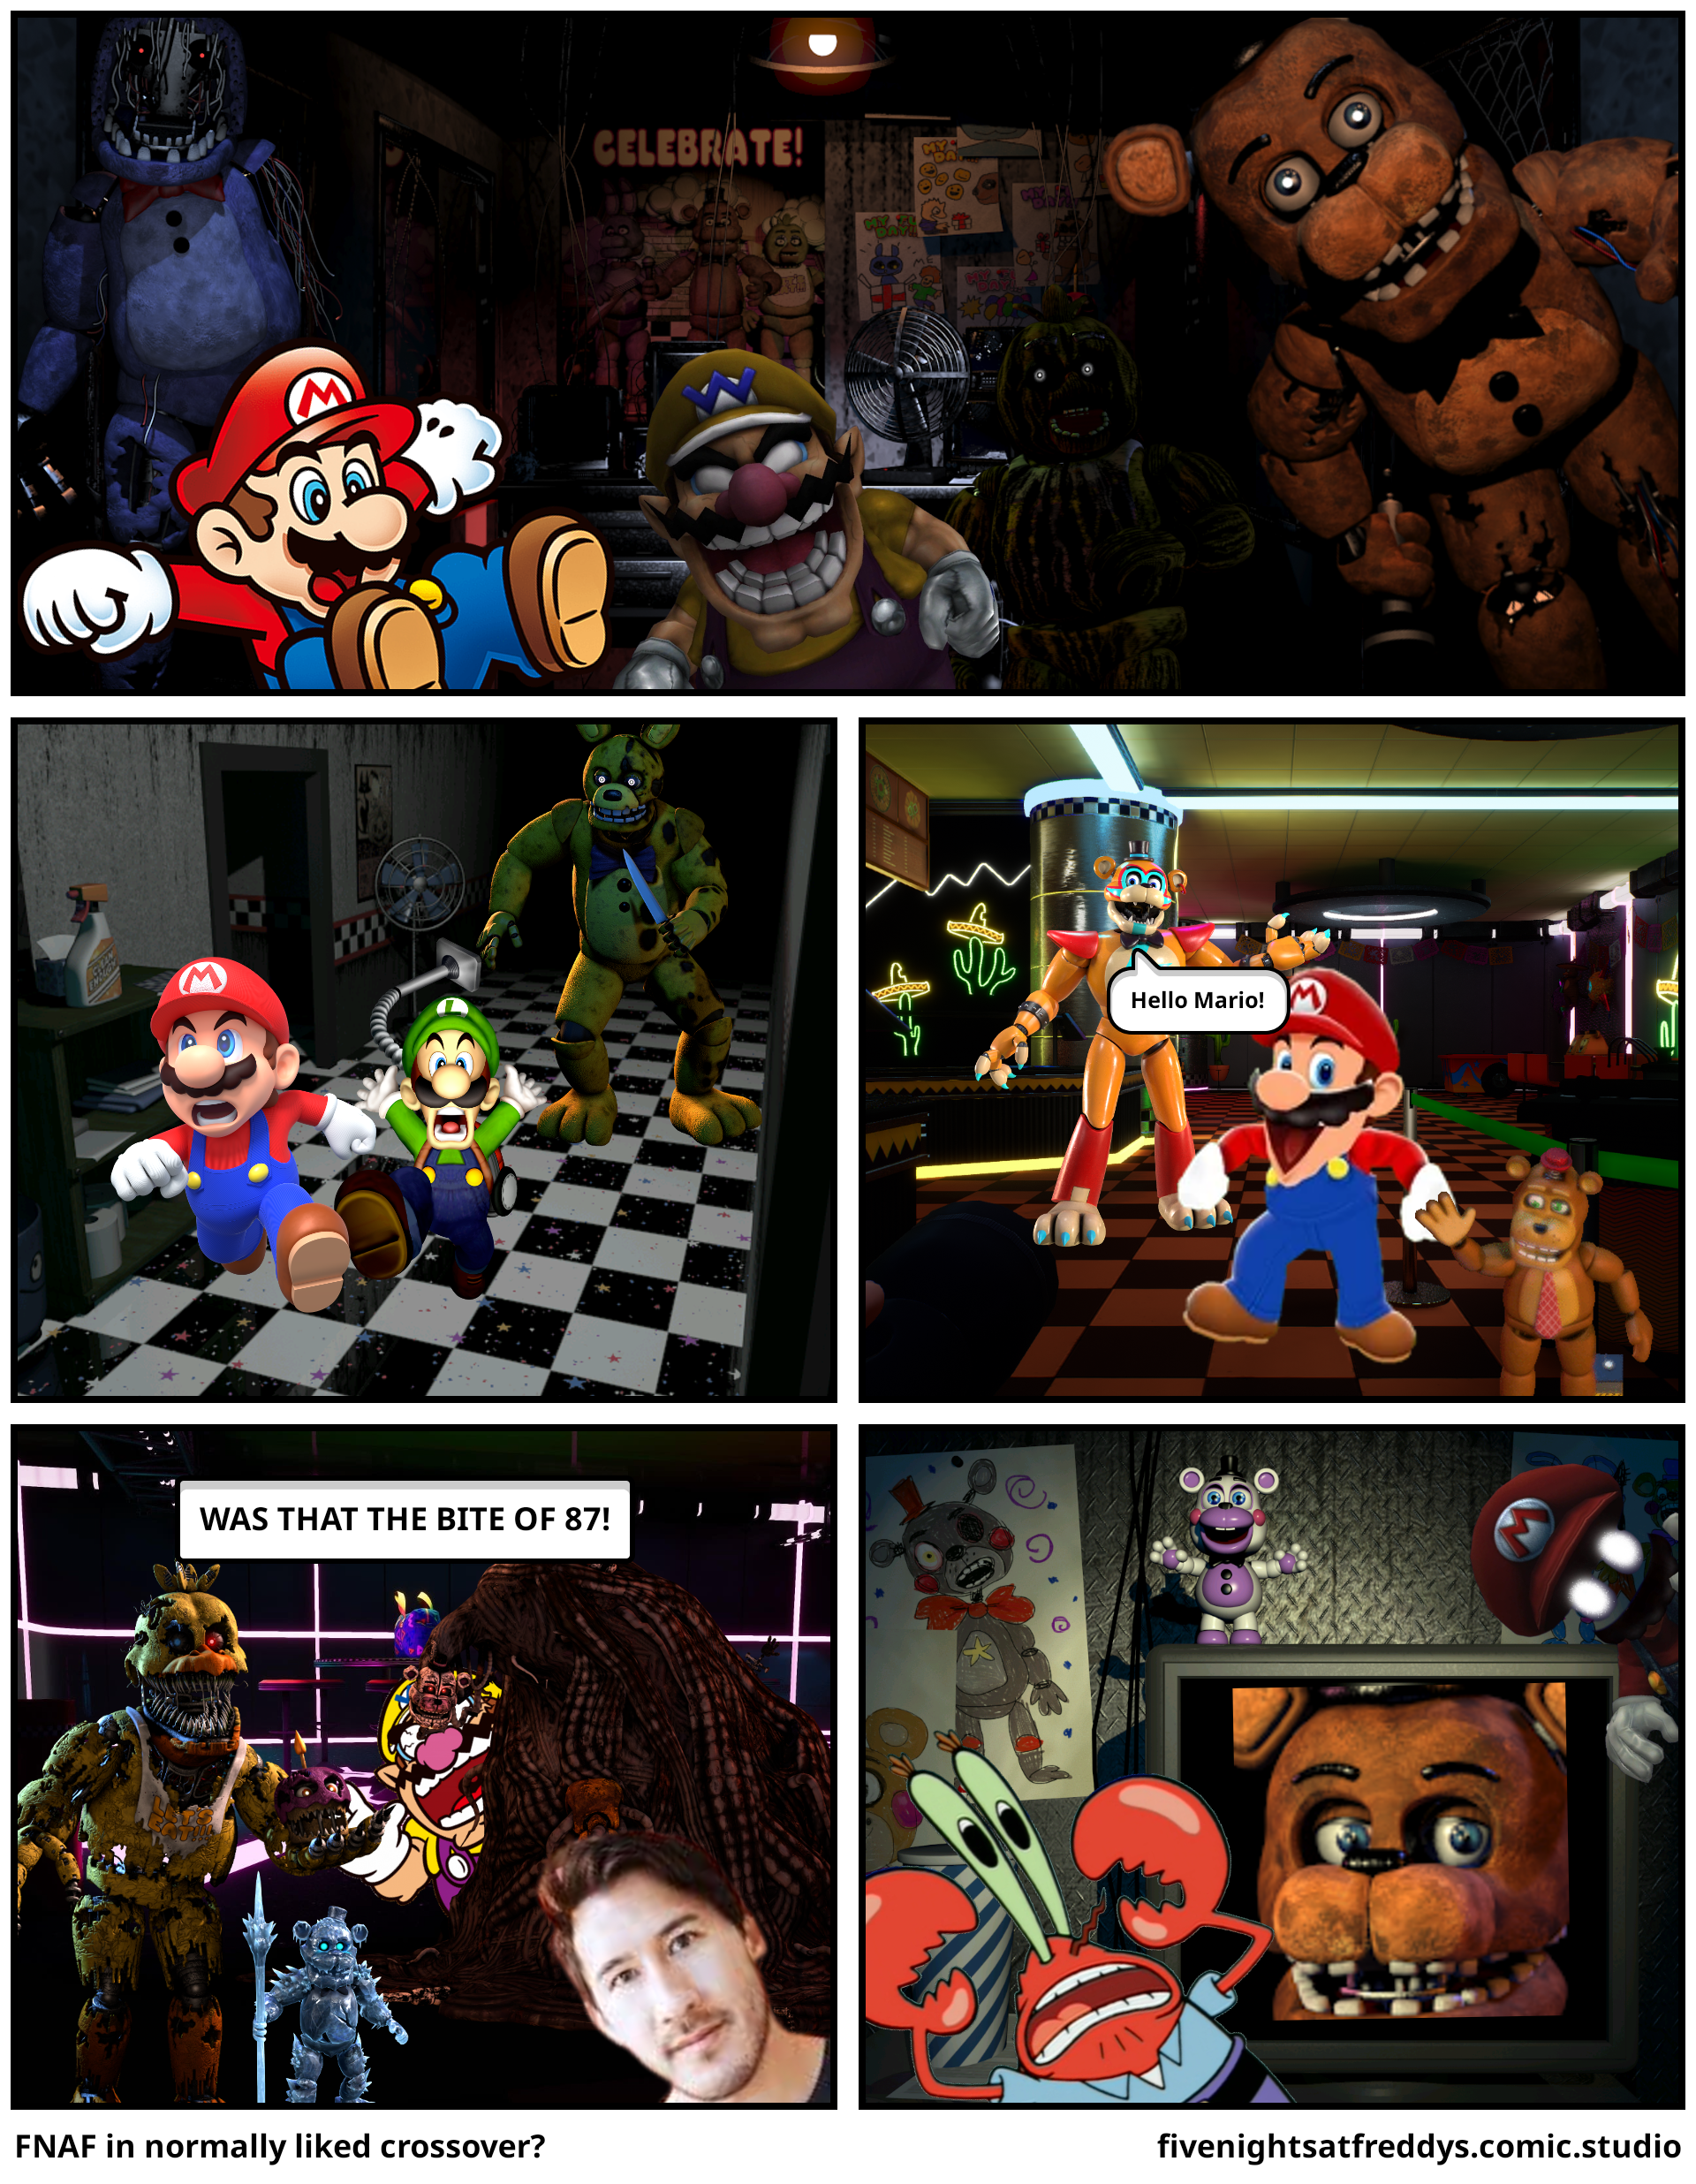 FNAF in normally liked crossover?